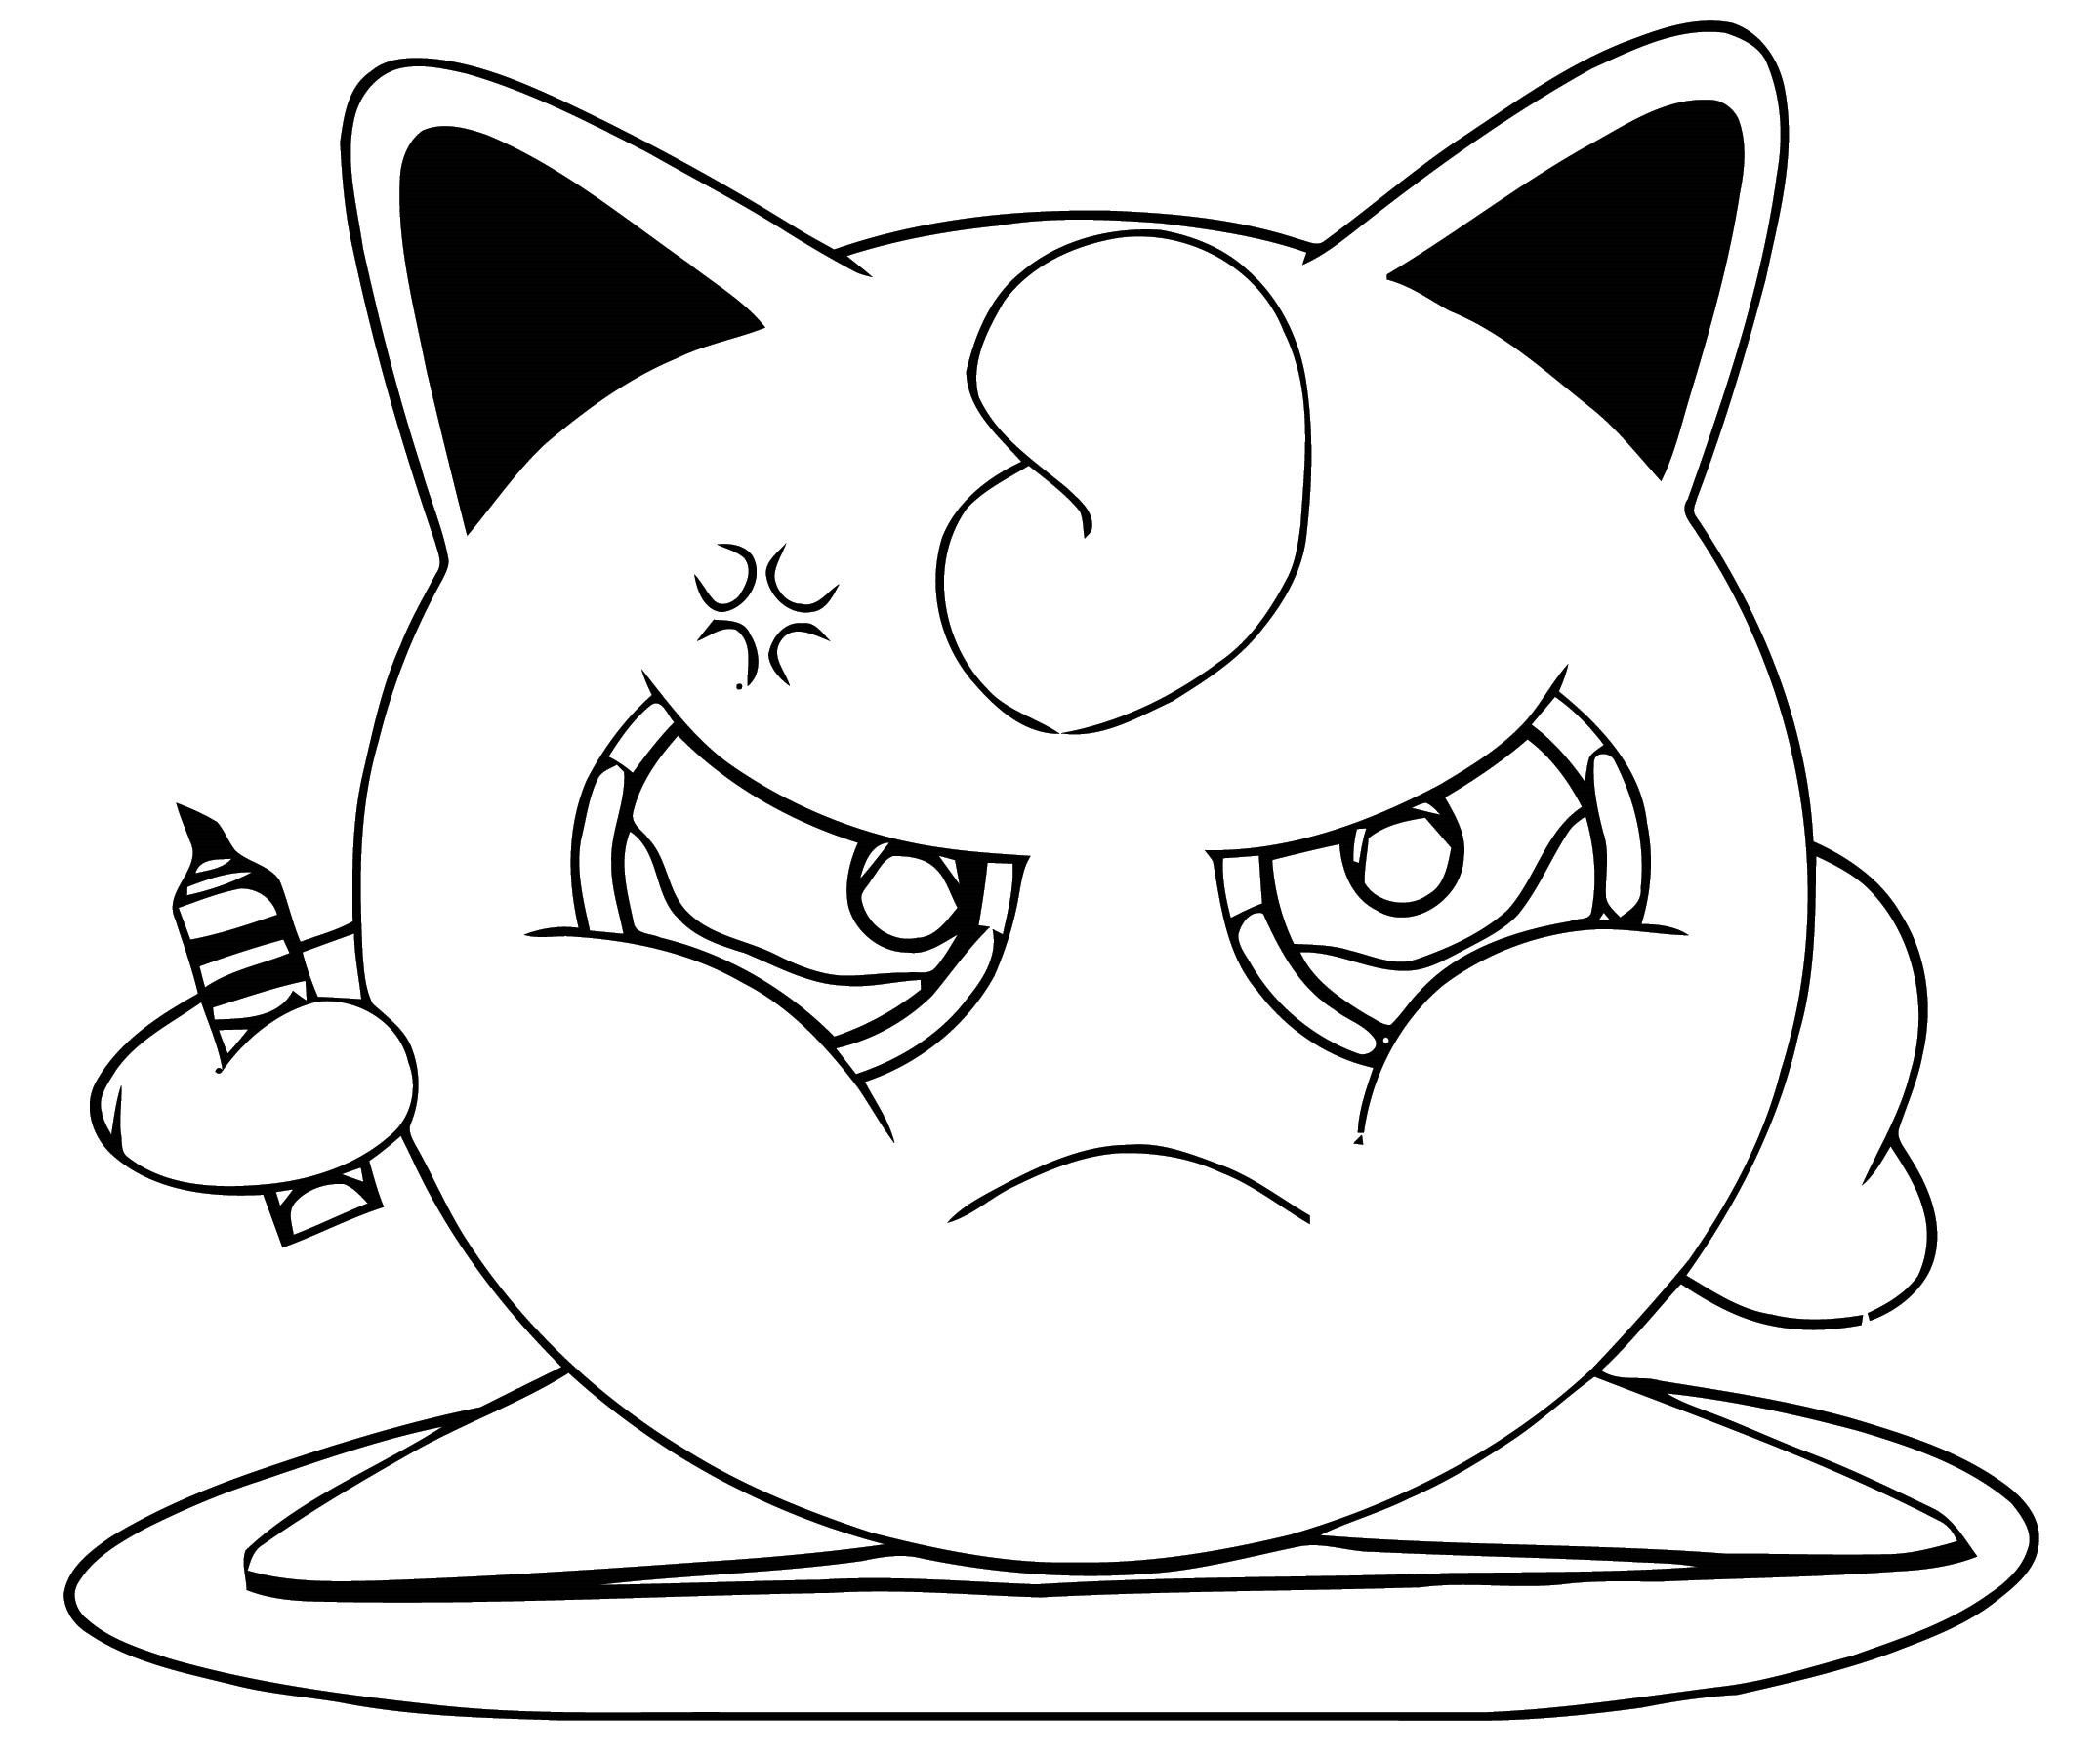 Jigglypuff Pokemon Images Coloring Pages | Pokemon Jigglypuff, Pokemon à Coloriage Pokemon Rondoudou